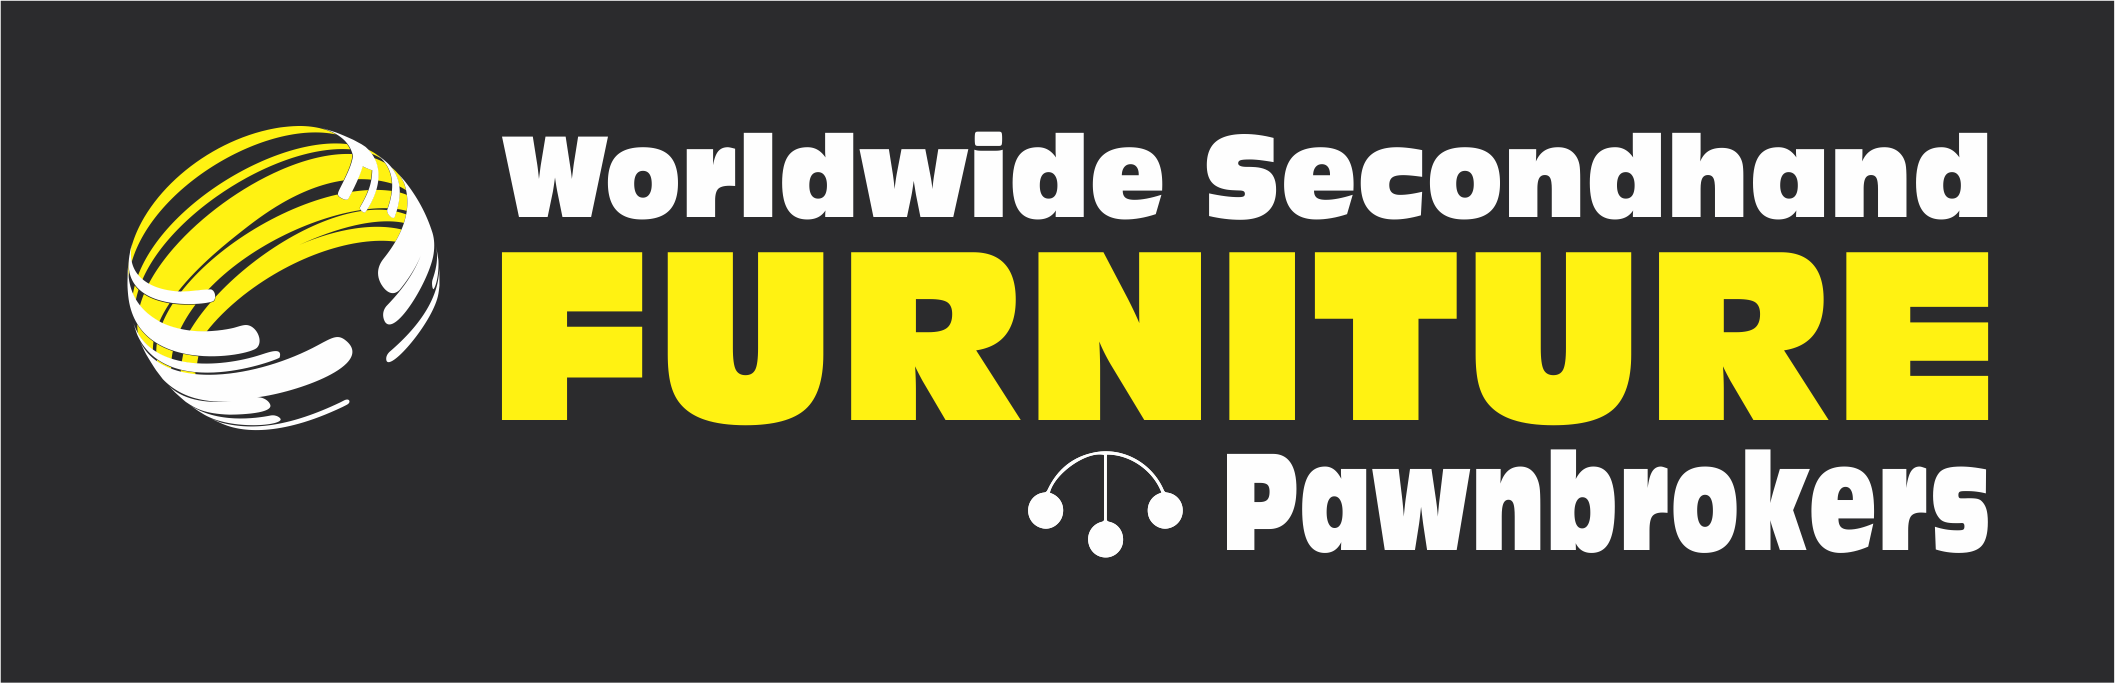 Worldwide Secondhand Furniture and Pawnbroker logo